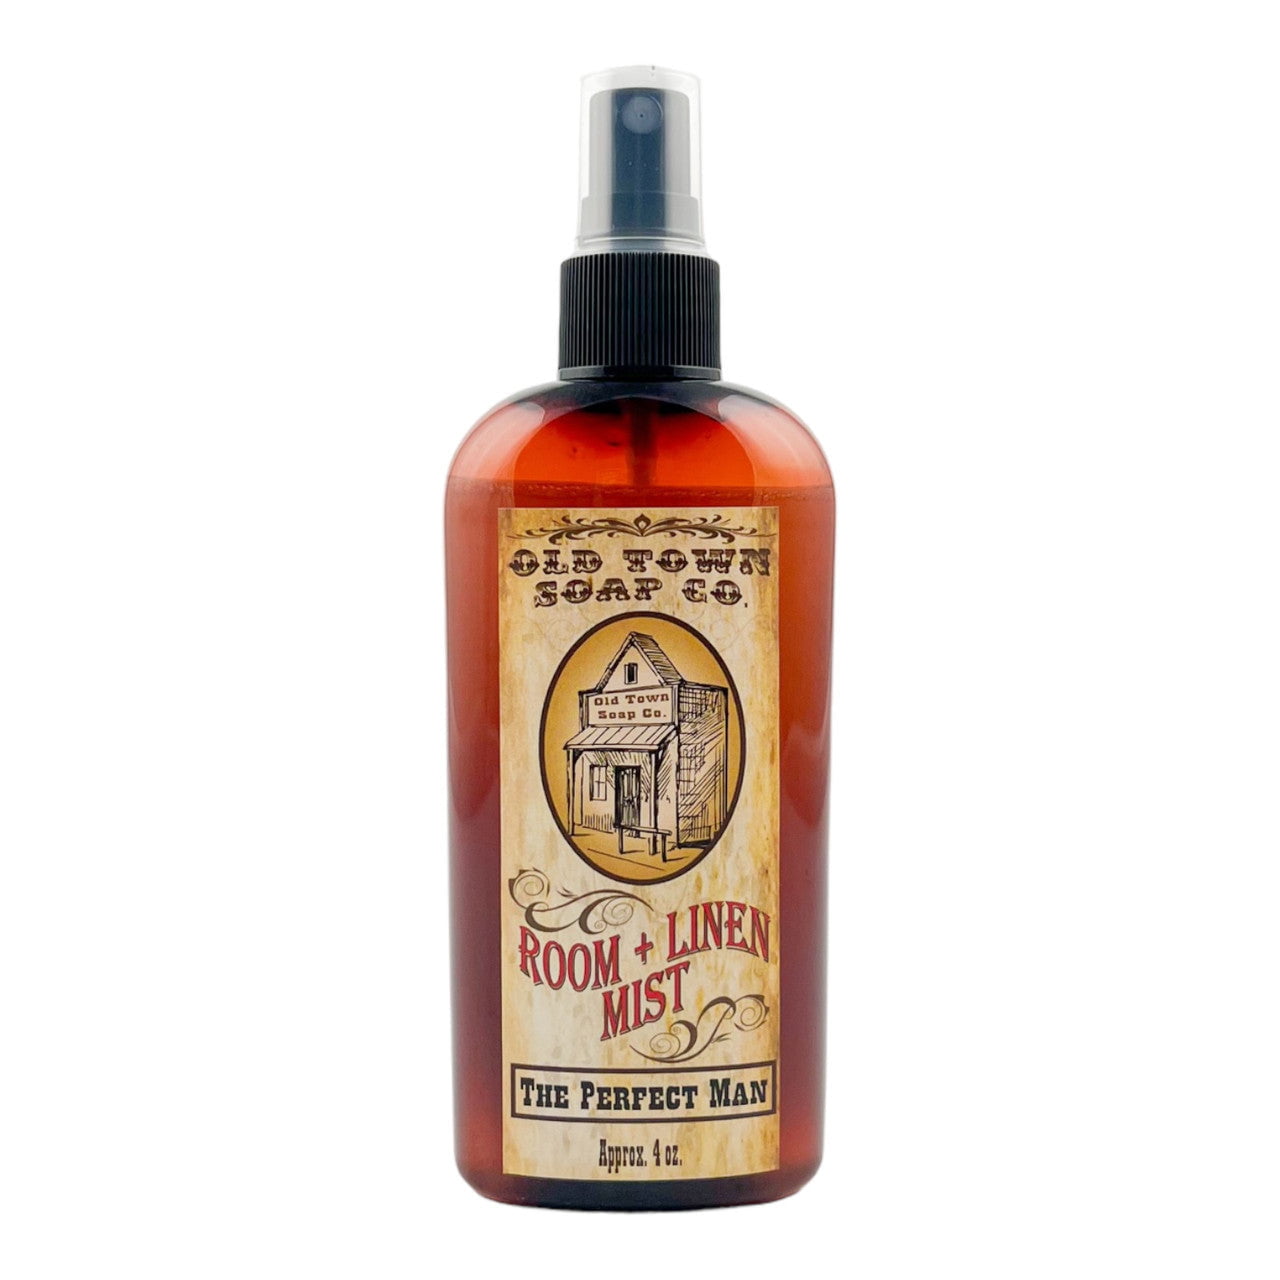 The Perfect Man -Room+Linen Mist - Old Town Soap Co.